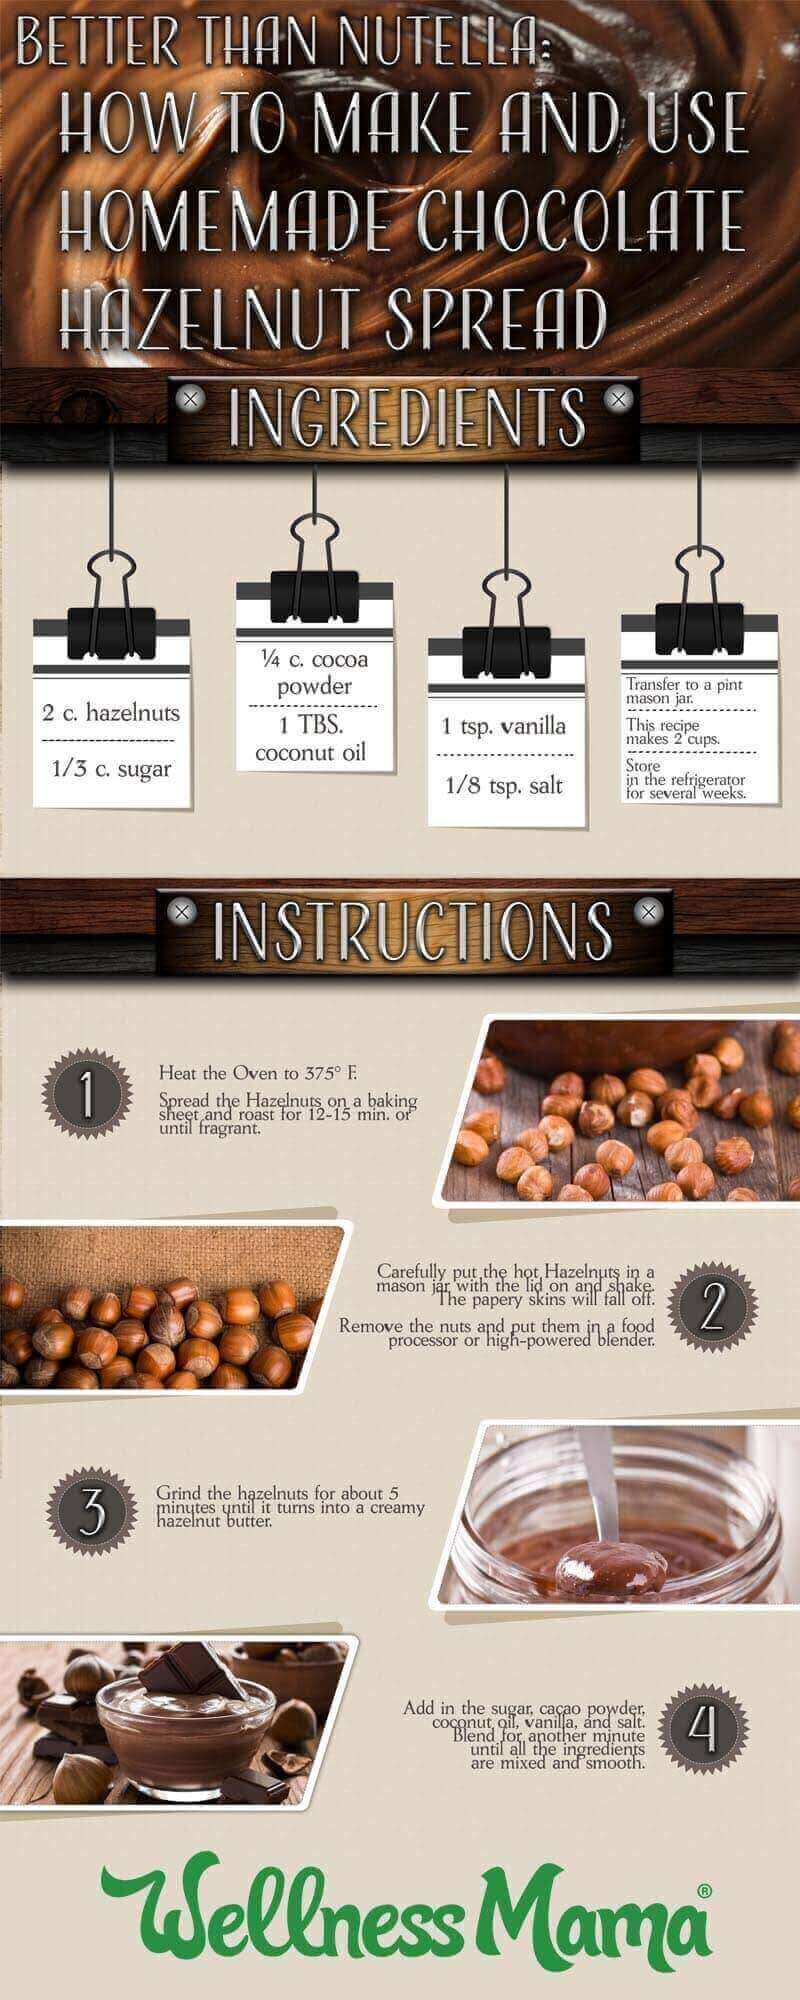 how-to-make-nutella-infographic